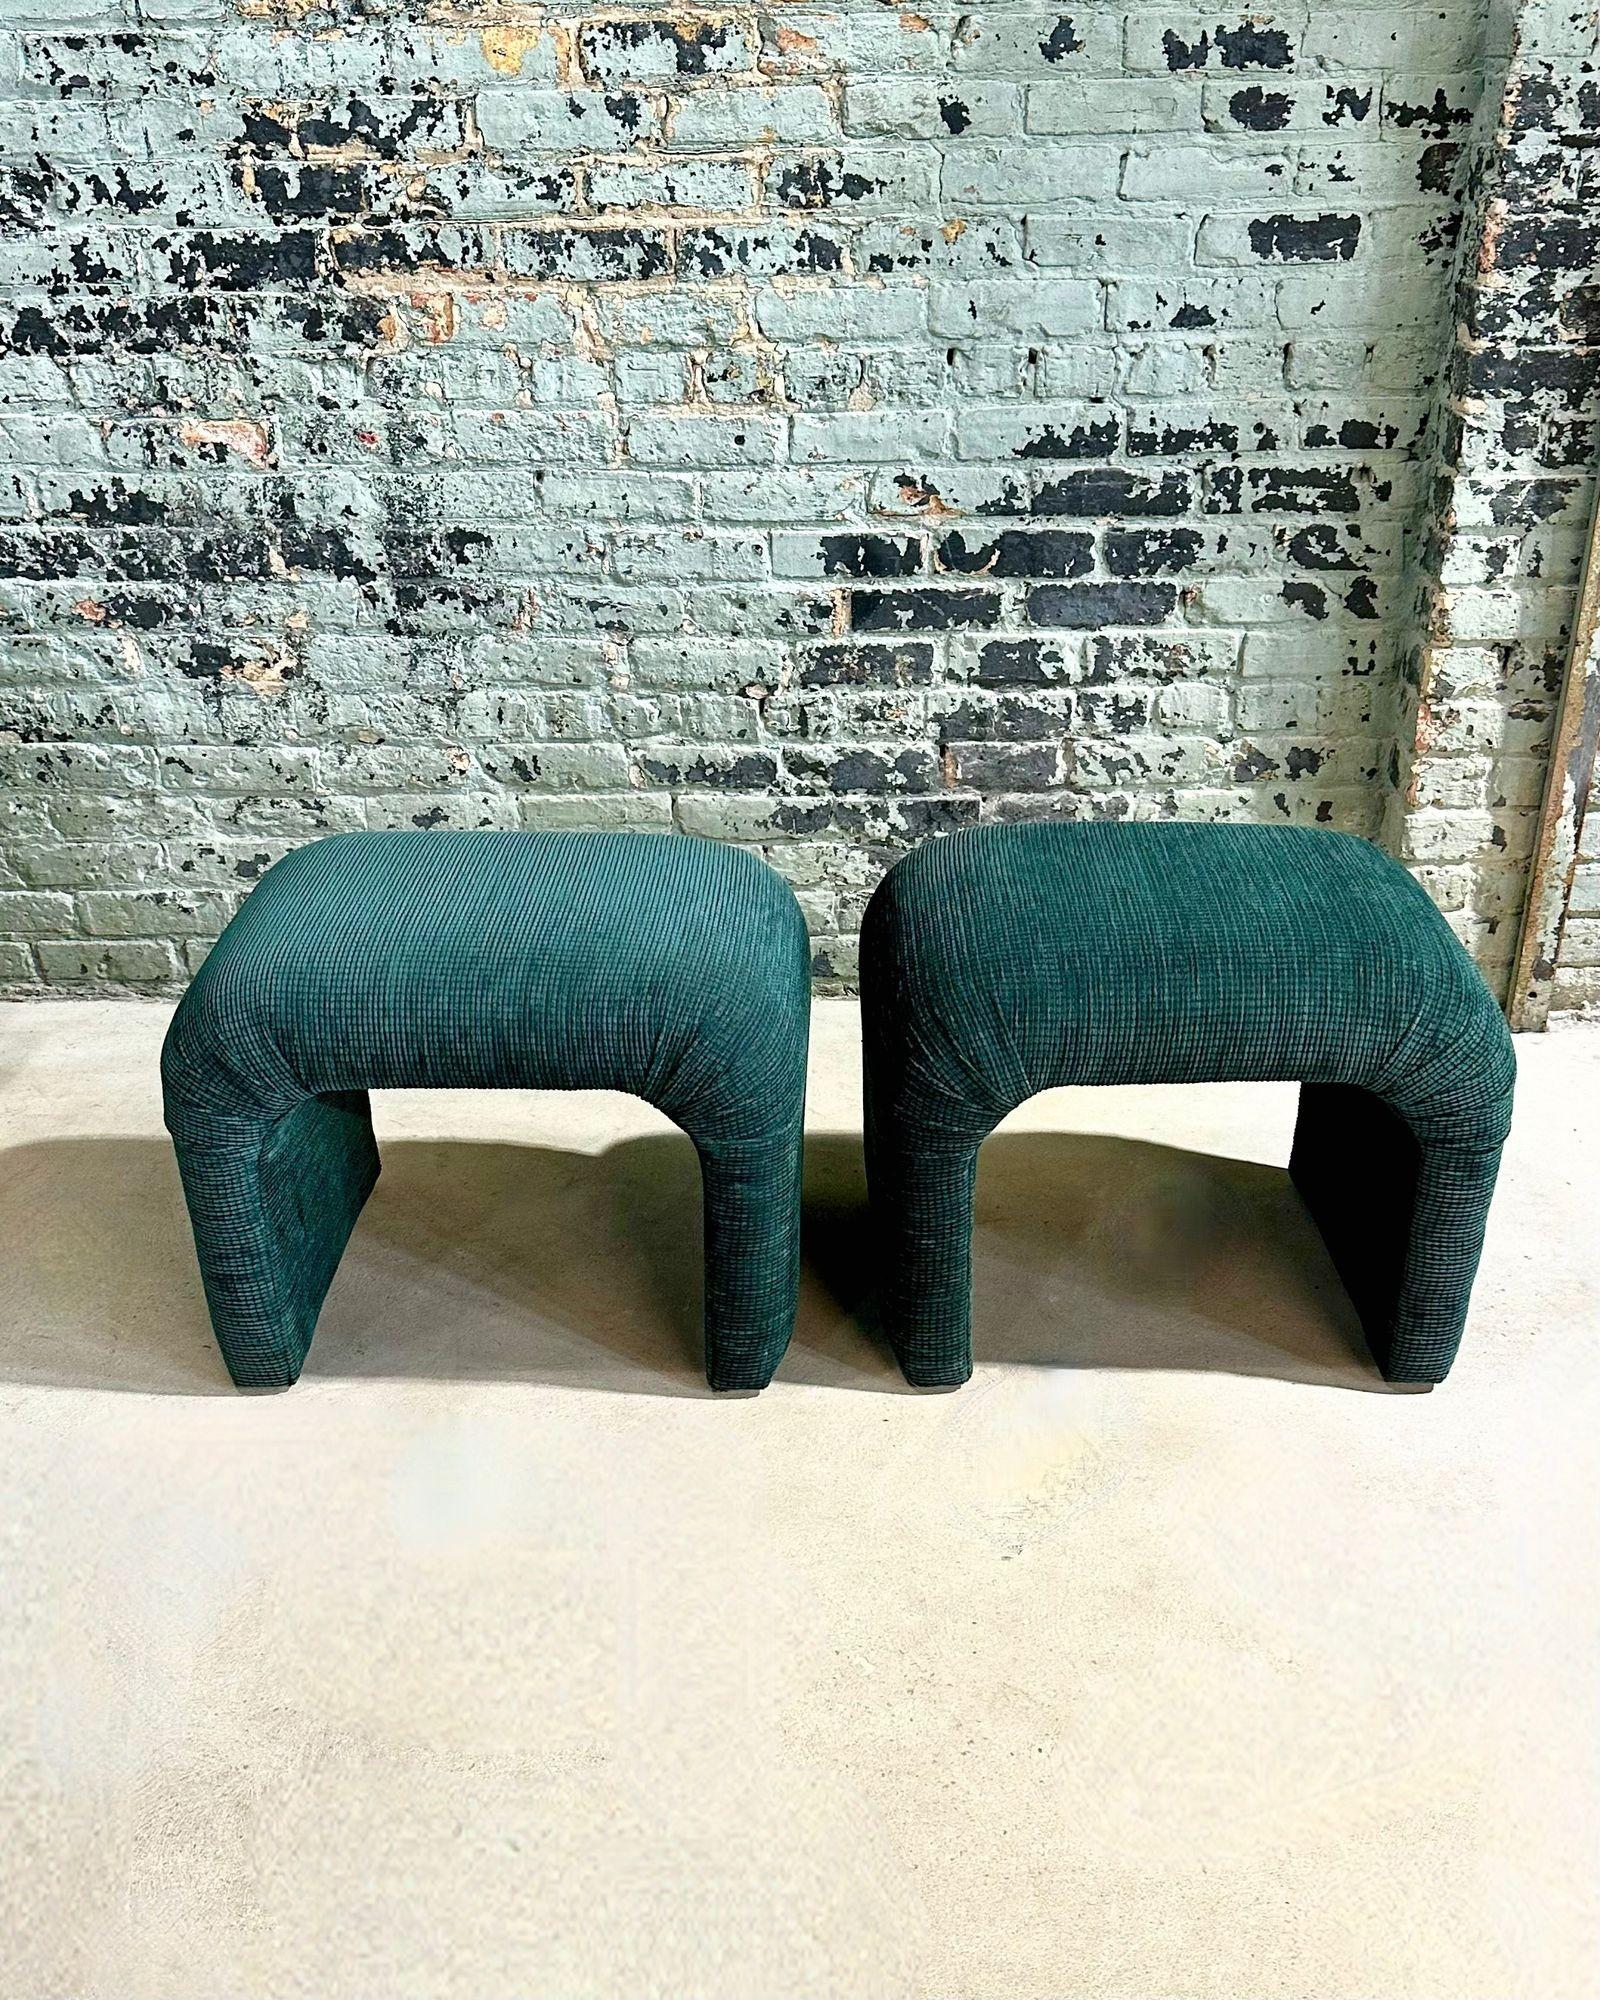 Vladimir Kagan for Directional Pair Waterfall Stools, 1990.  Original upholstery in great condition.